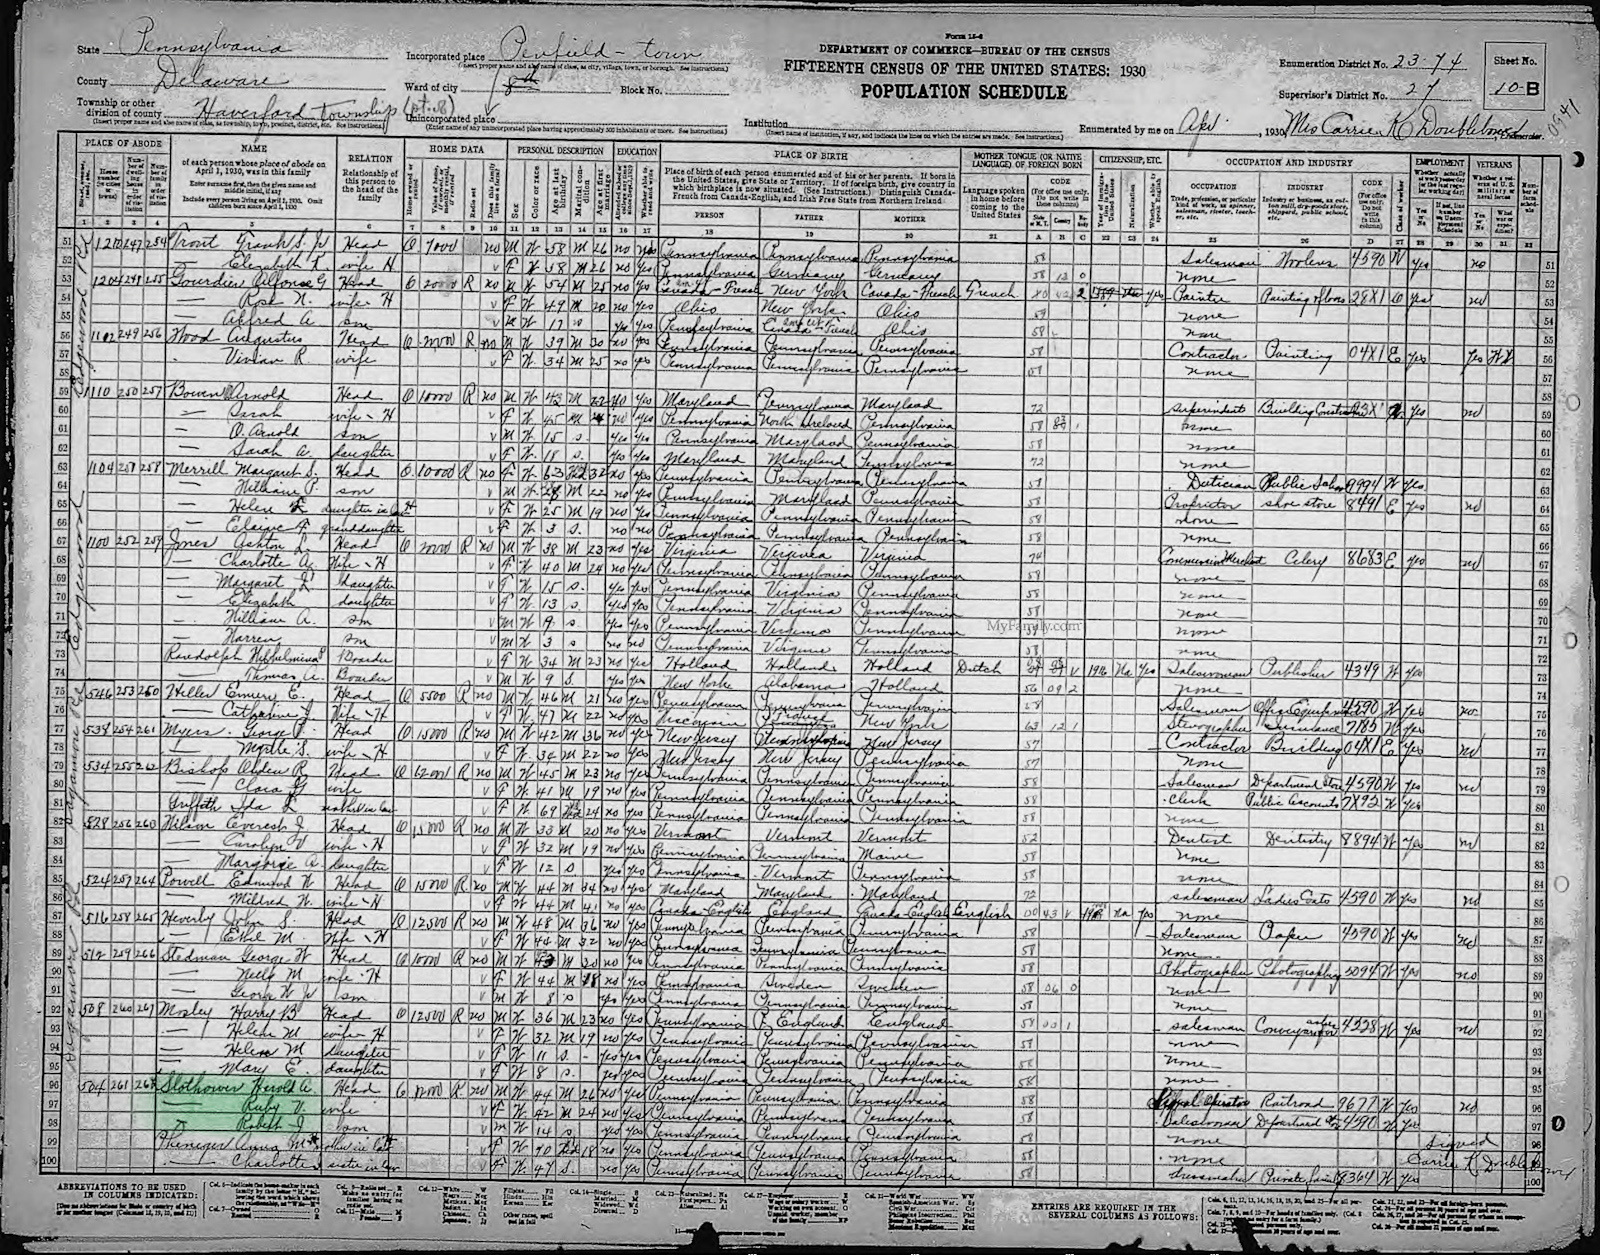 Census Slothower - 1930b United States Federal Census